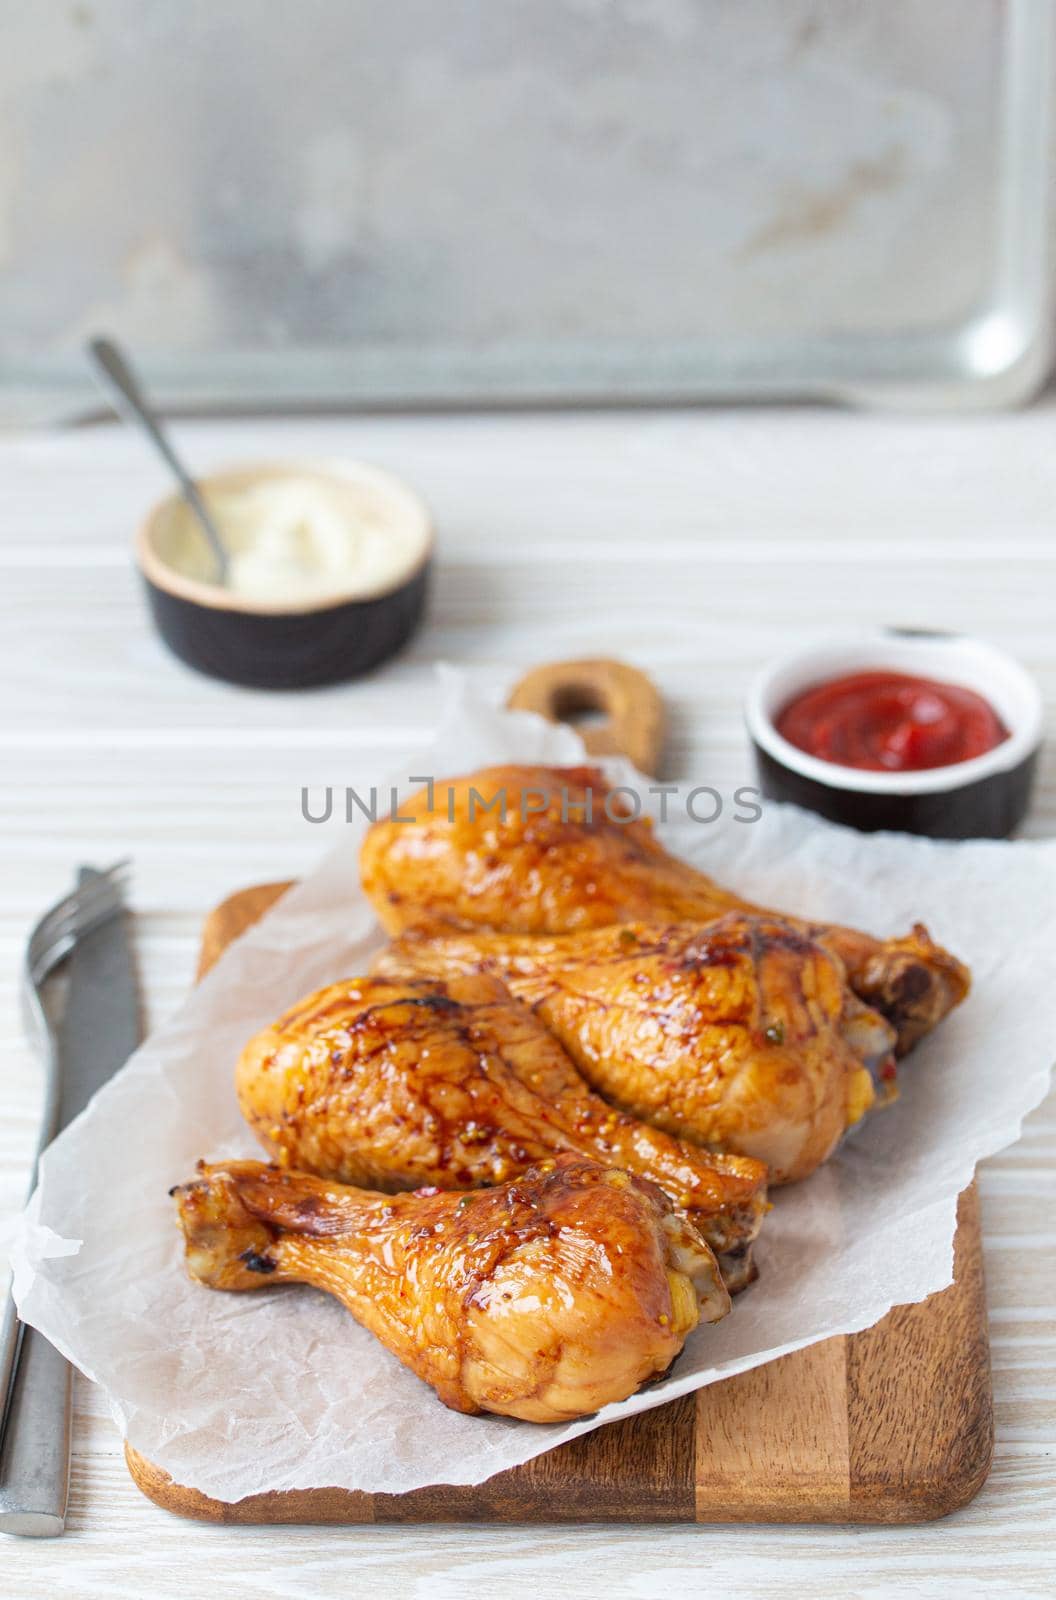 Roasted or grilled chicken legs drumsticks by its_al_dente